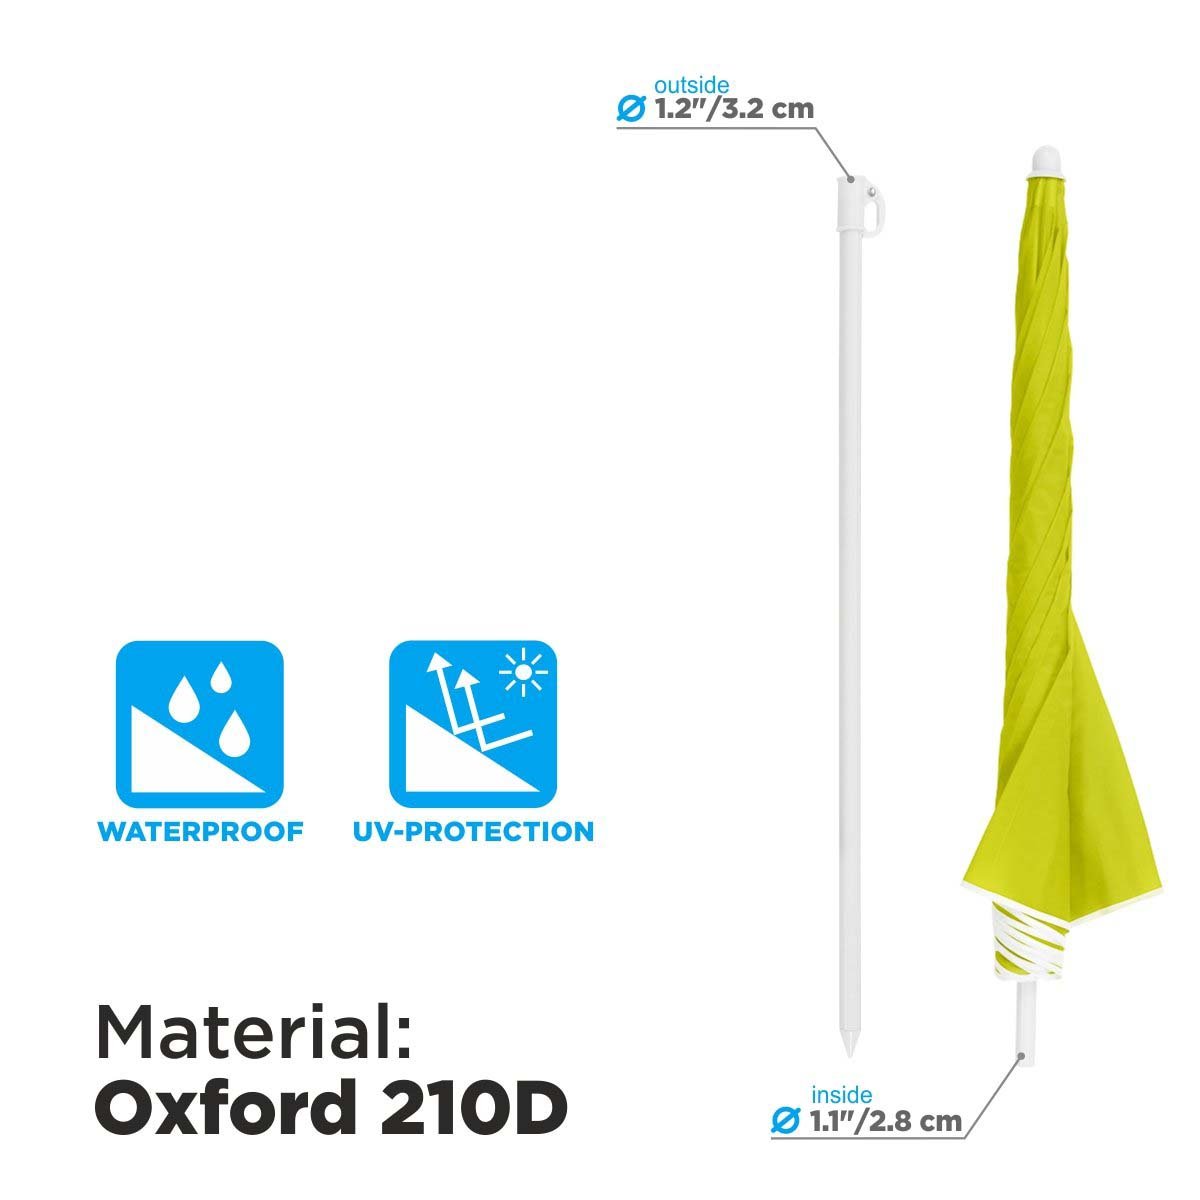 Lime Green Folding Beach Umbrella is made of waterproof Oxford 210D featuring UV protection